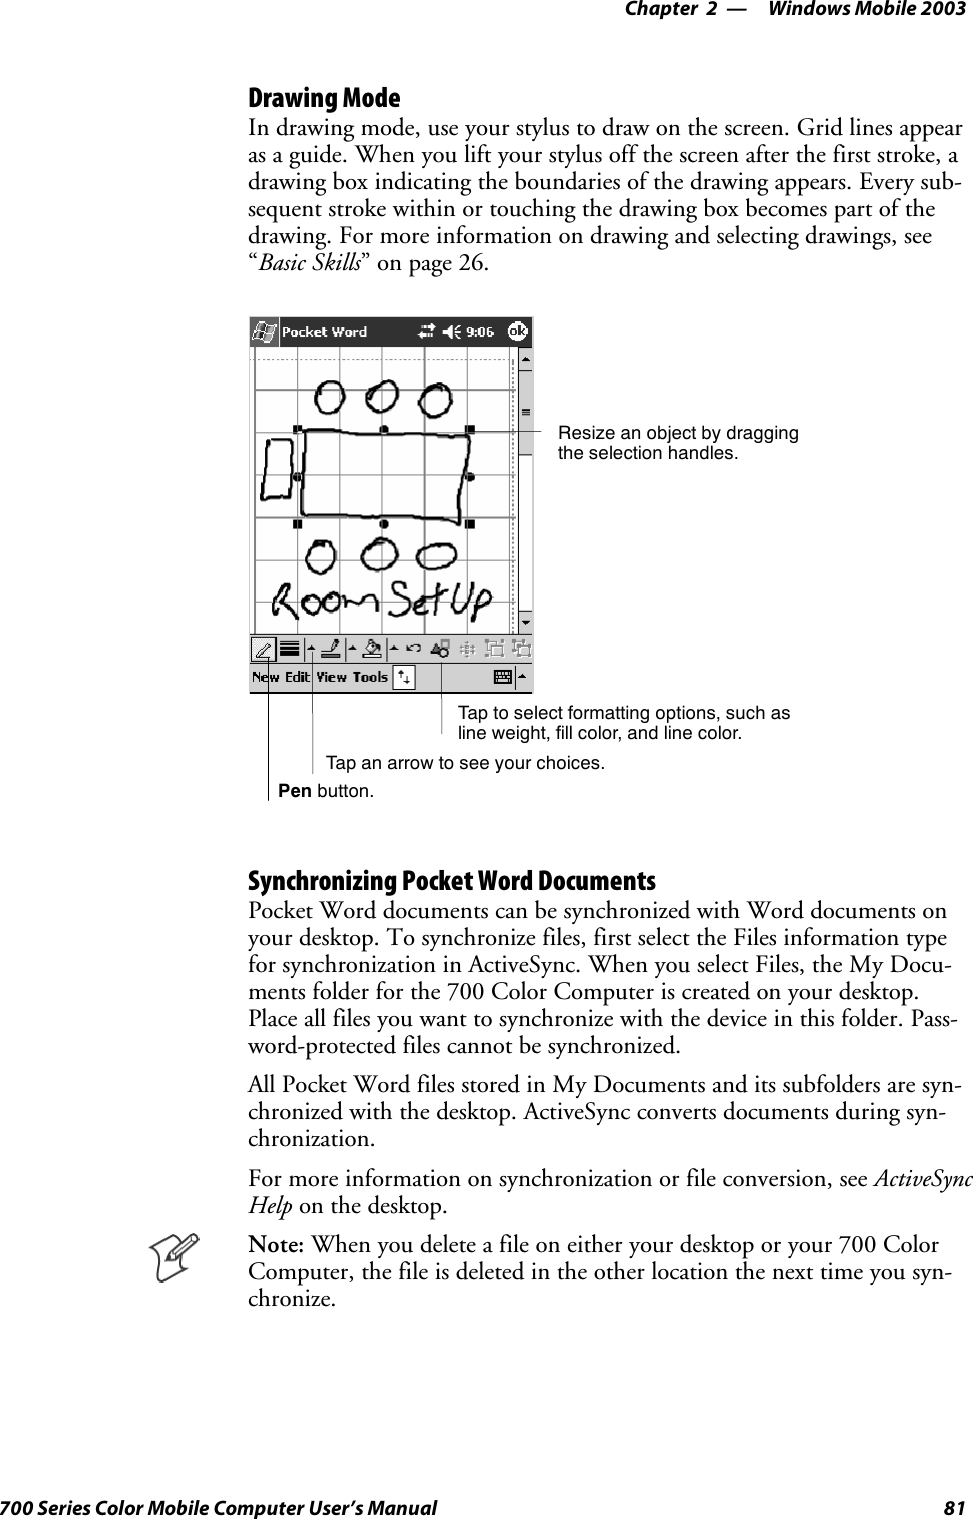 Windows Mobile 2003—Chapter 281700 Series Color Mobile Computer User’s ManualDrawing ModeIn drawing mode, use your stylus to draw on the screen. Grid lines appearas a guide. When you lift your stylus off the screen after the first stroke, adrawing box indicating the boundaries of the drawing appears. Every sub-sequent stroke within or touching the drawing box becomes part of thedrawing. For more information on drawing and selecting drawings, see“Basic Skills” on page 26.Tap to select formatting options, such asline weight, fill color, and line color.Resize an object by draggingthe selection handles.Tap an arrow to see your choices.Pen button.Synchronizing Pocket Word DocumentsPocket Word documents can be synchronized with Word documents onyour desktop. To synchronize files, first select the Files information typefor synchronization in ActiveSync. When you select Files, the My Docu-ments folder for the 700 Color Computer is created on your desktop.Place all files you want to synchronize with the device in this folder. Pass-word-protected files cannot be synchronized.All Pocket Word files stored in My Documents and its subfolders are syn-chronized with the desktop. ActiveSync converts documents during syn-chronization.For more information on synchronization or file conversion, see ActiveSyncHelp on the desktop.Note: When you delete a file on either your desktop or your 700 ColorComputer, the file is deleted in the other location the next time you syn-chronize.